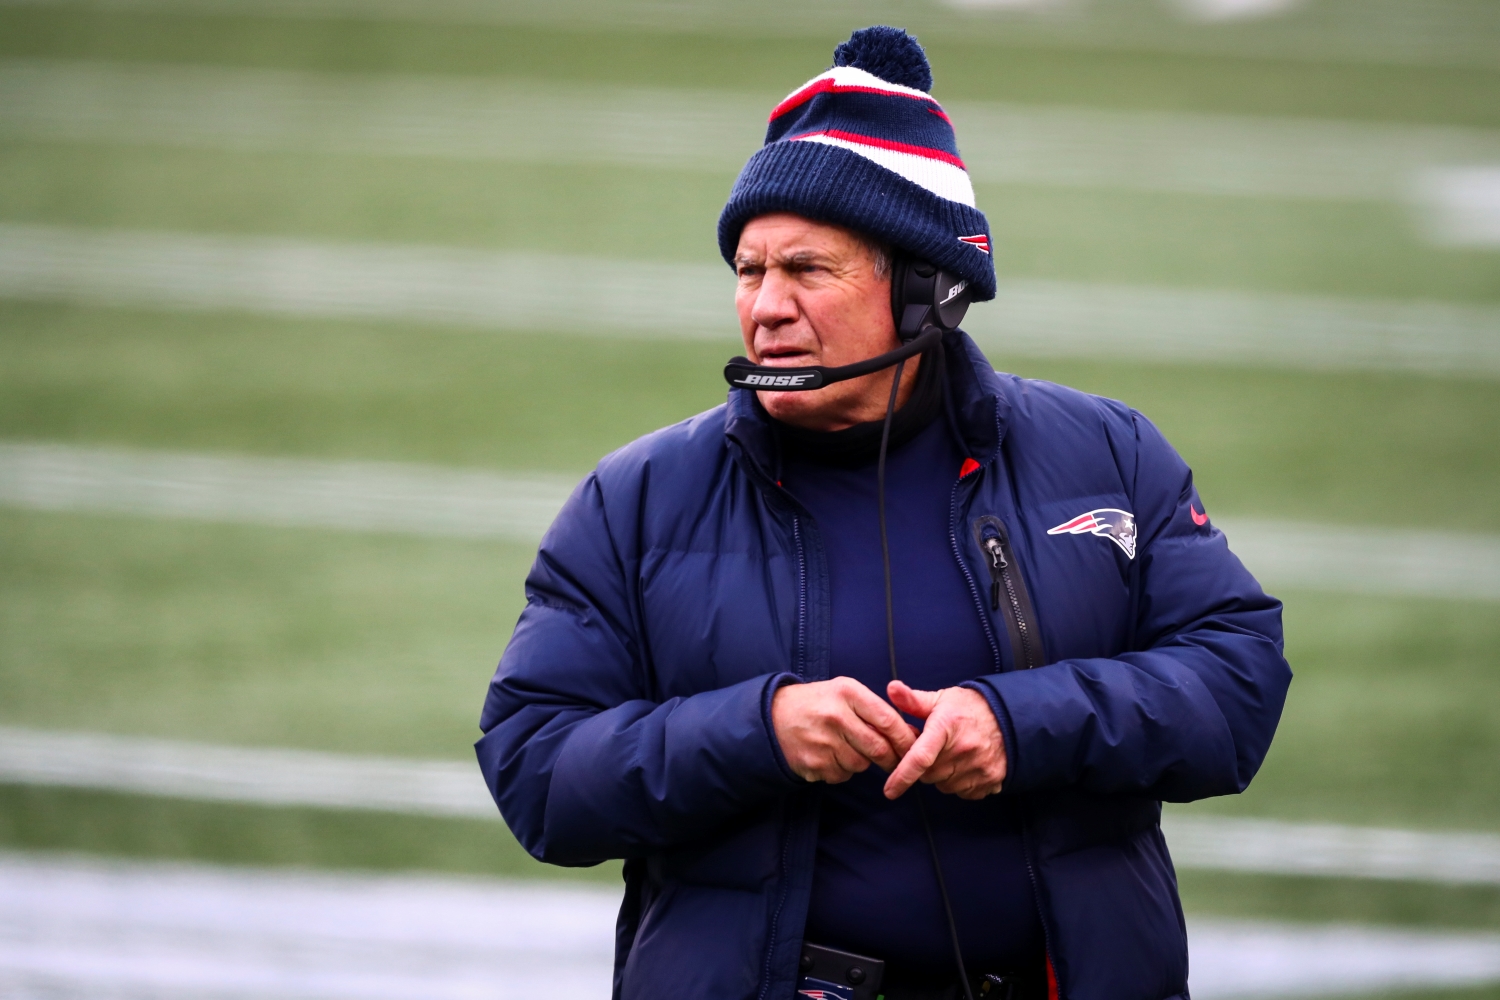 New England Patriots coach Bill Belichick looks on during a game.